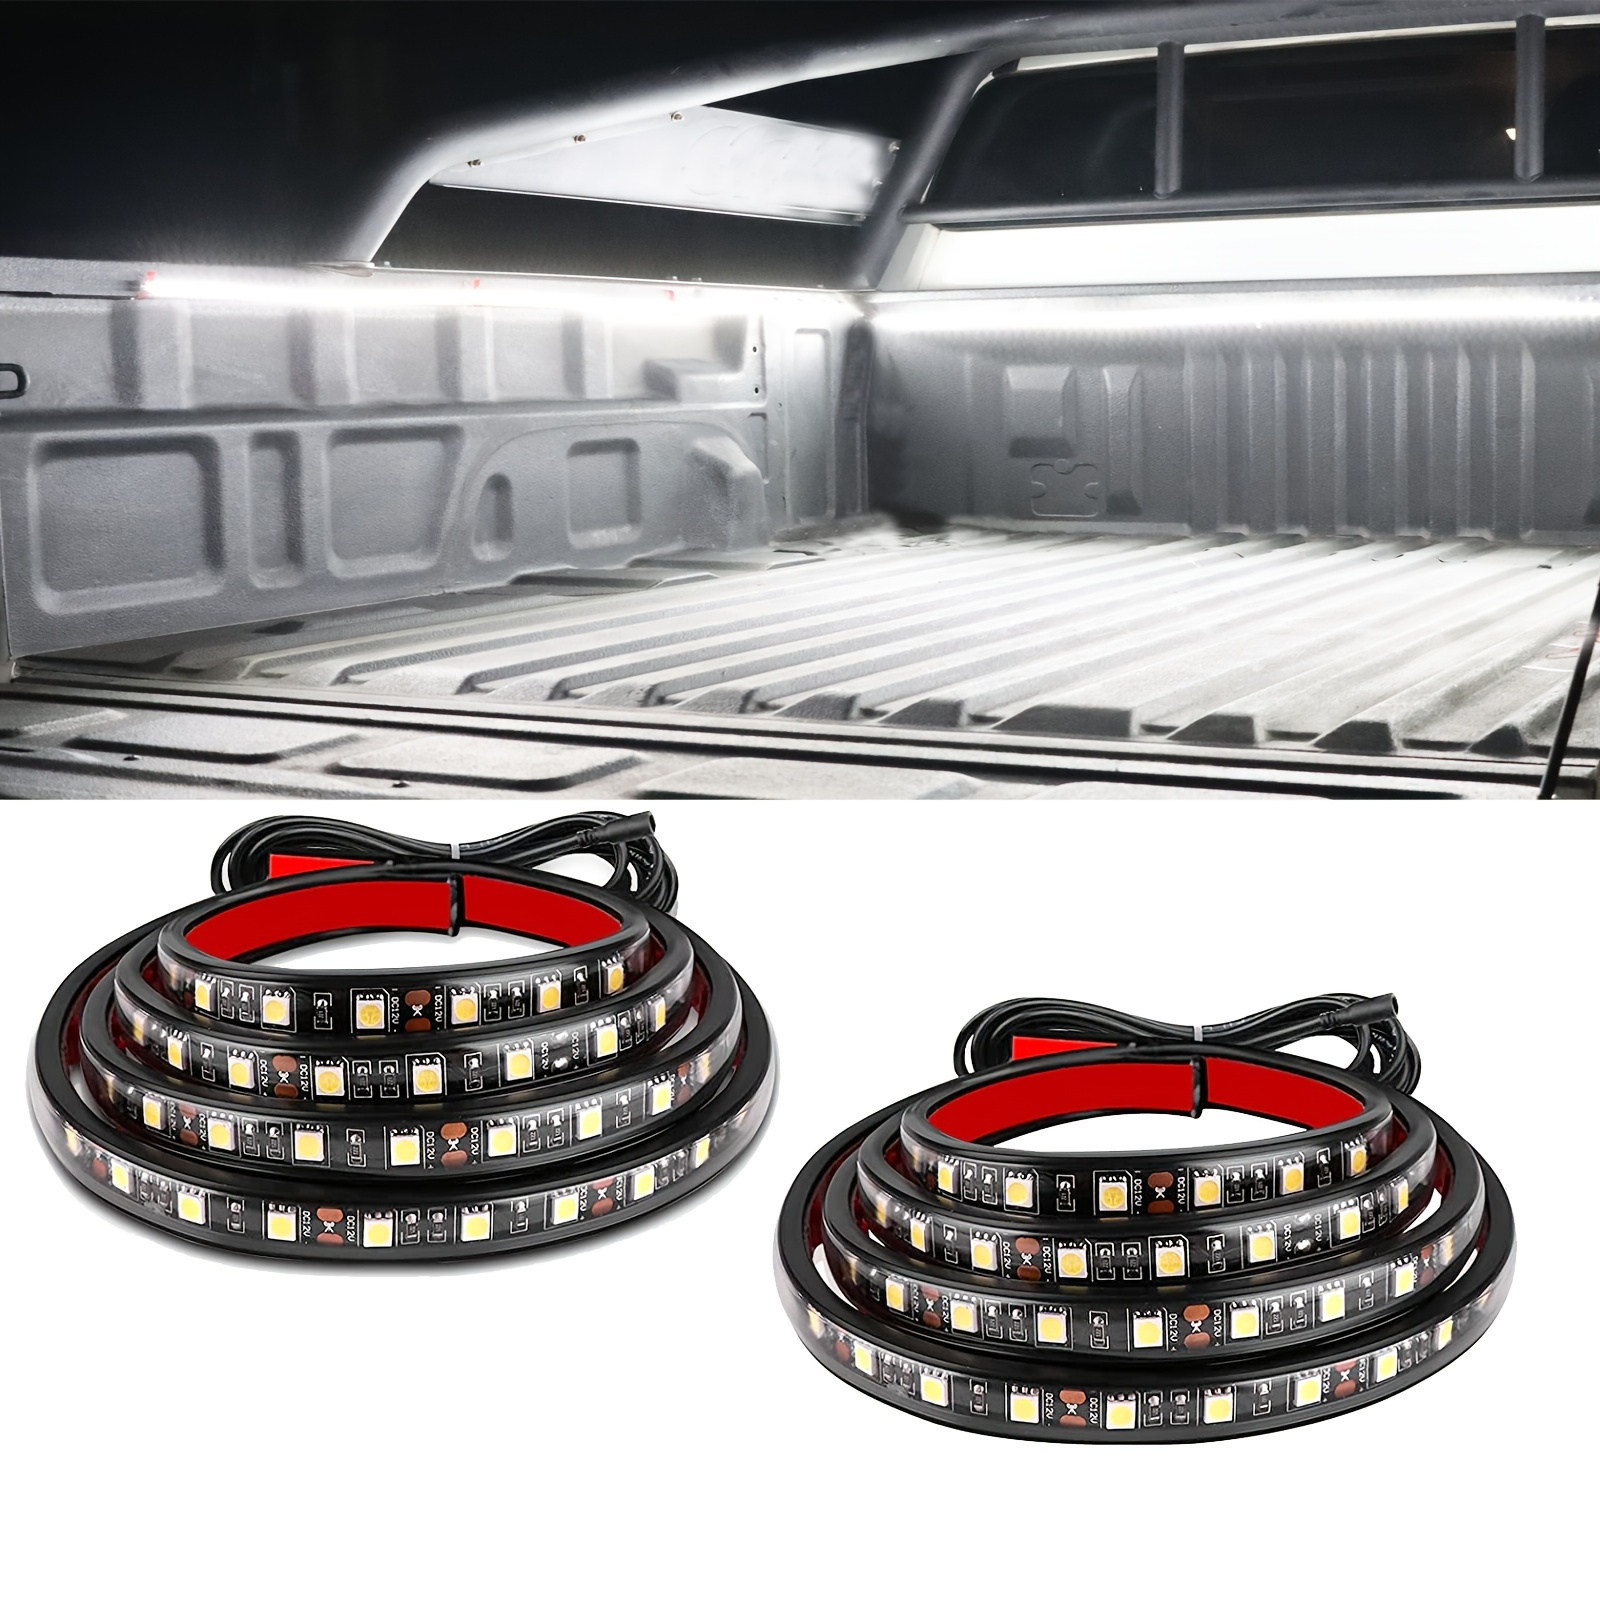 2X 60 Cargo Truck Bed LED Light Strip w/ Dimmer for Ford Chevy Pickup